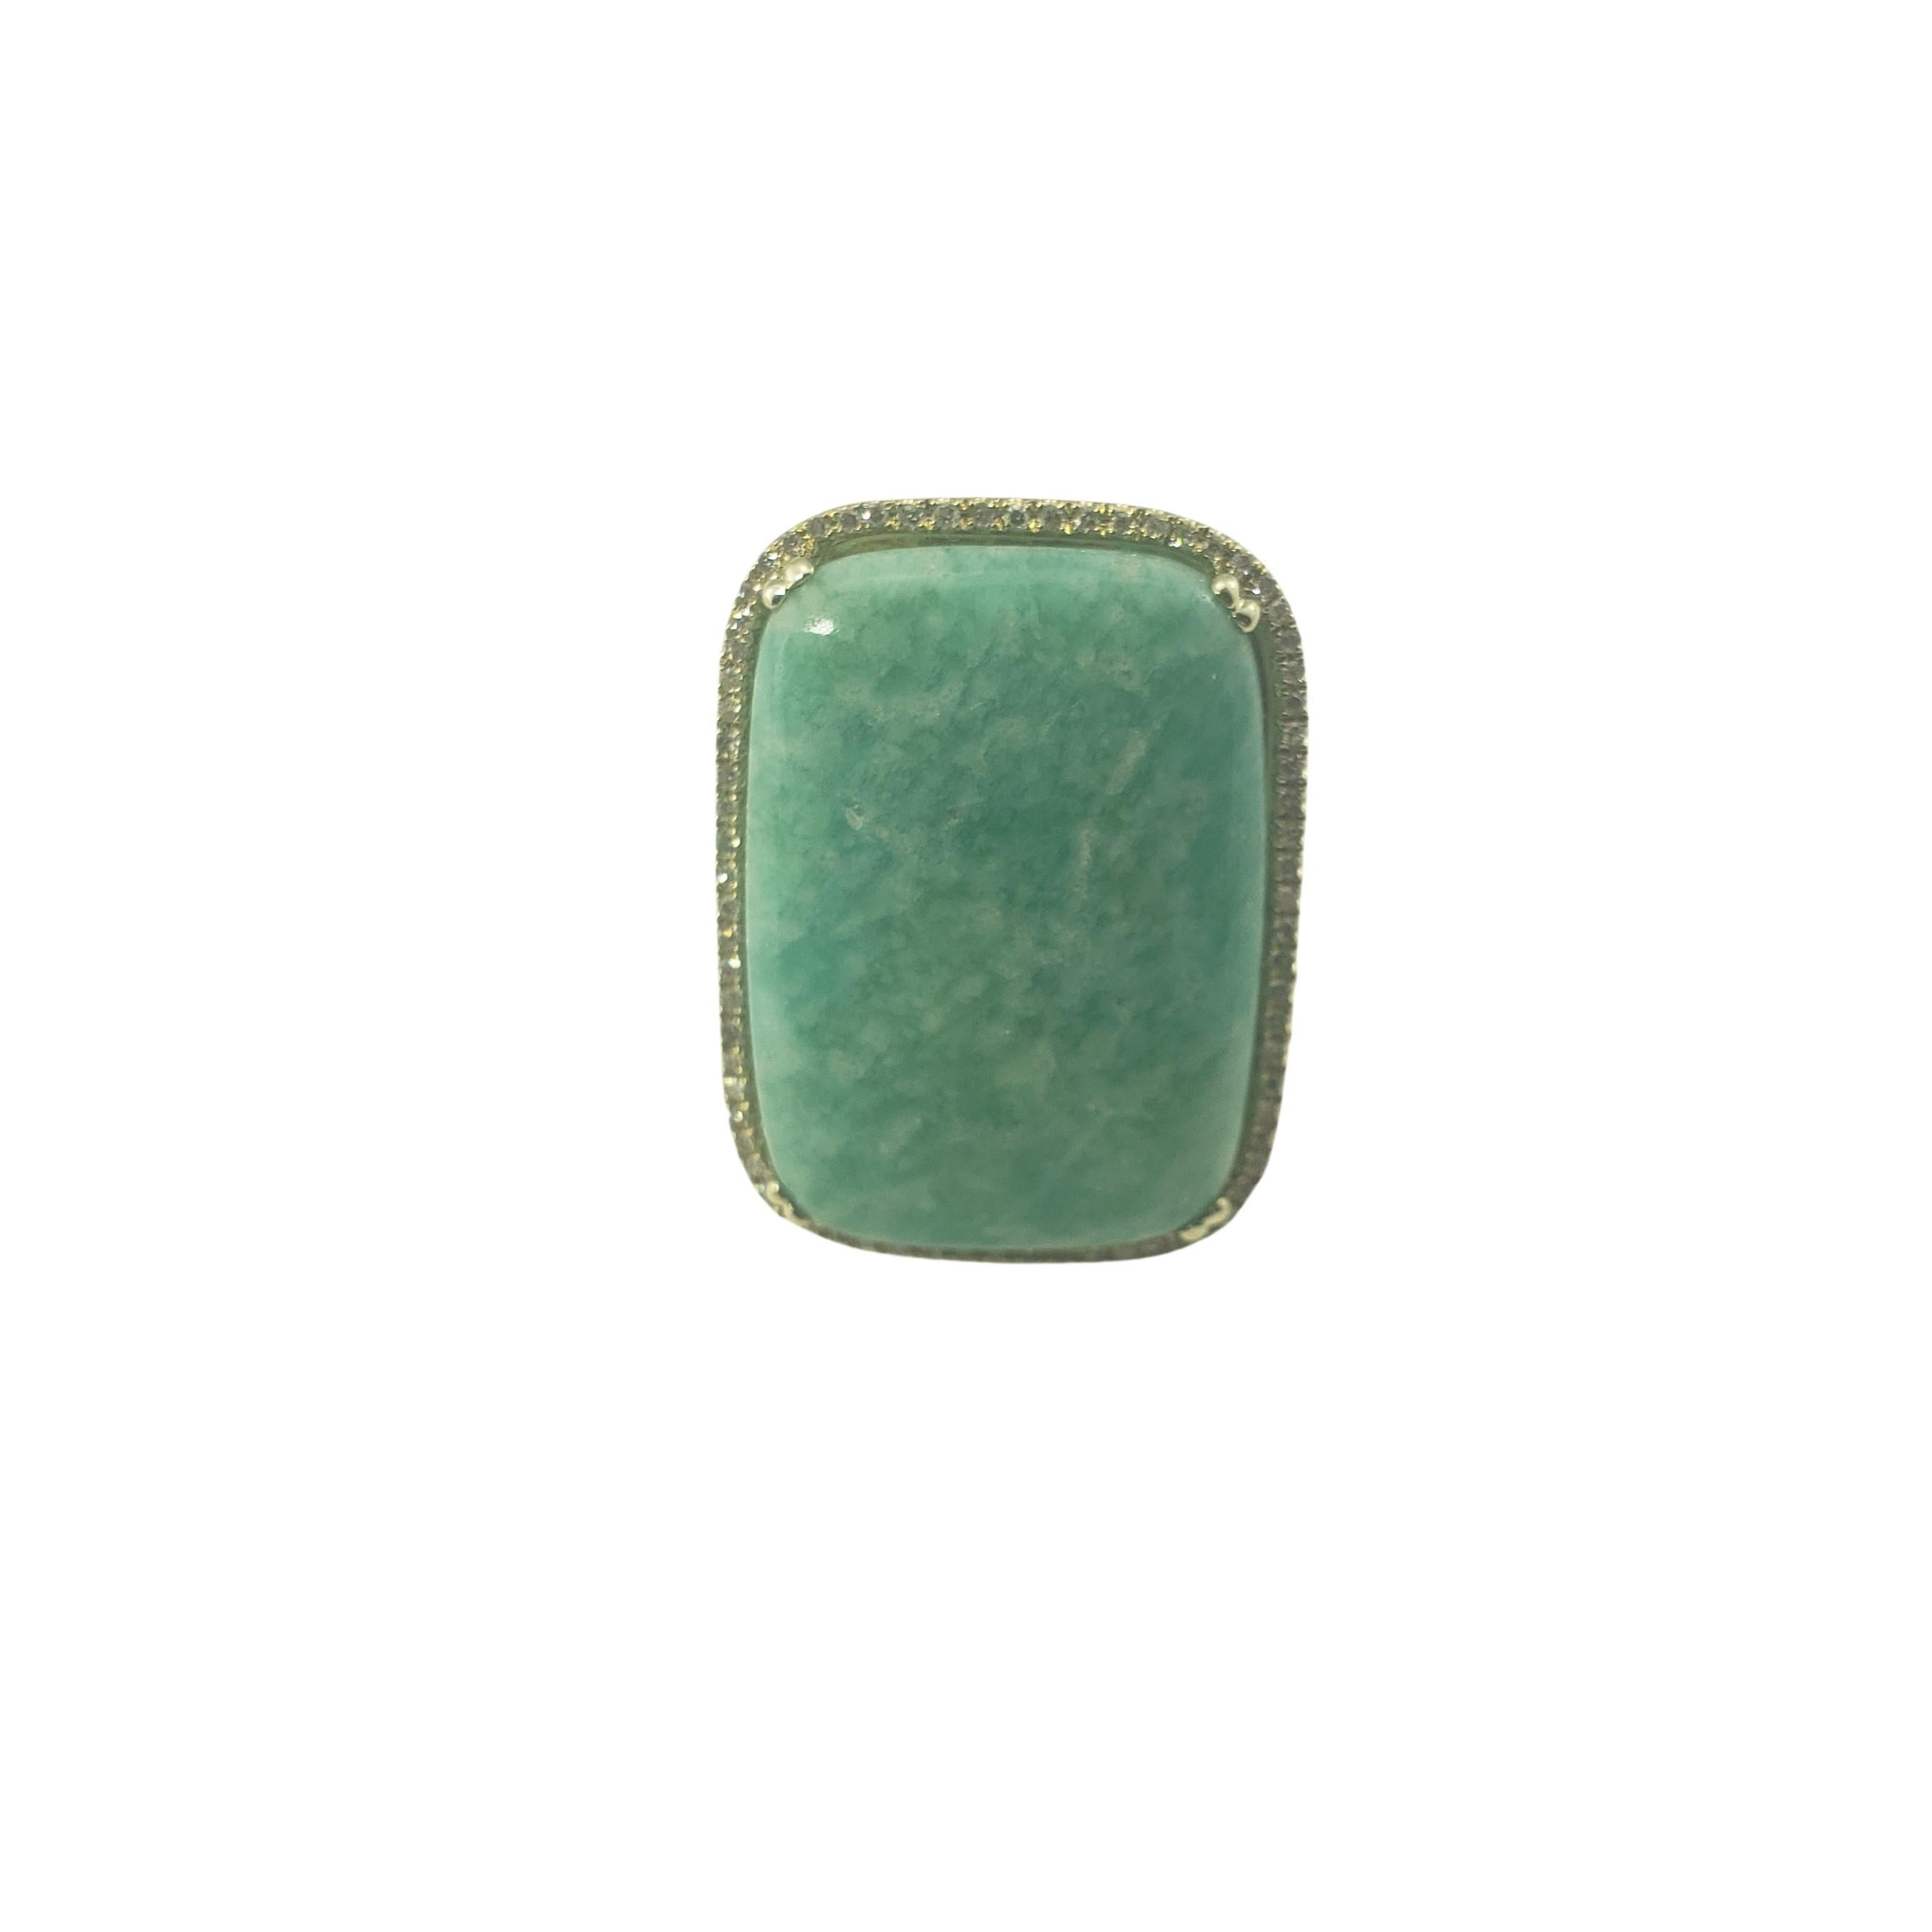 Vintage 14 Karat Yellow Gold Amazonite and Diamond Ring Size 6.5-

This lovely ring feature one rectangular cabochon cut amazonite (25 mm x 18 mm) surrounded by 74 round single cut diamonds set in classic 14K yellow gold. Top of ring measures 27 mm